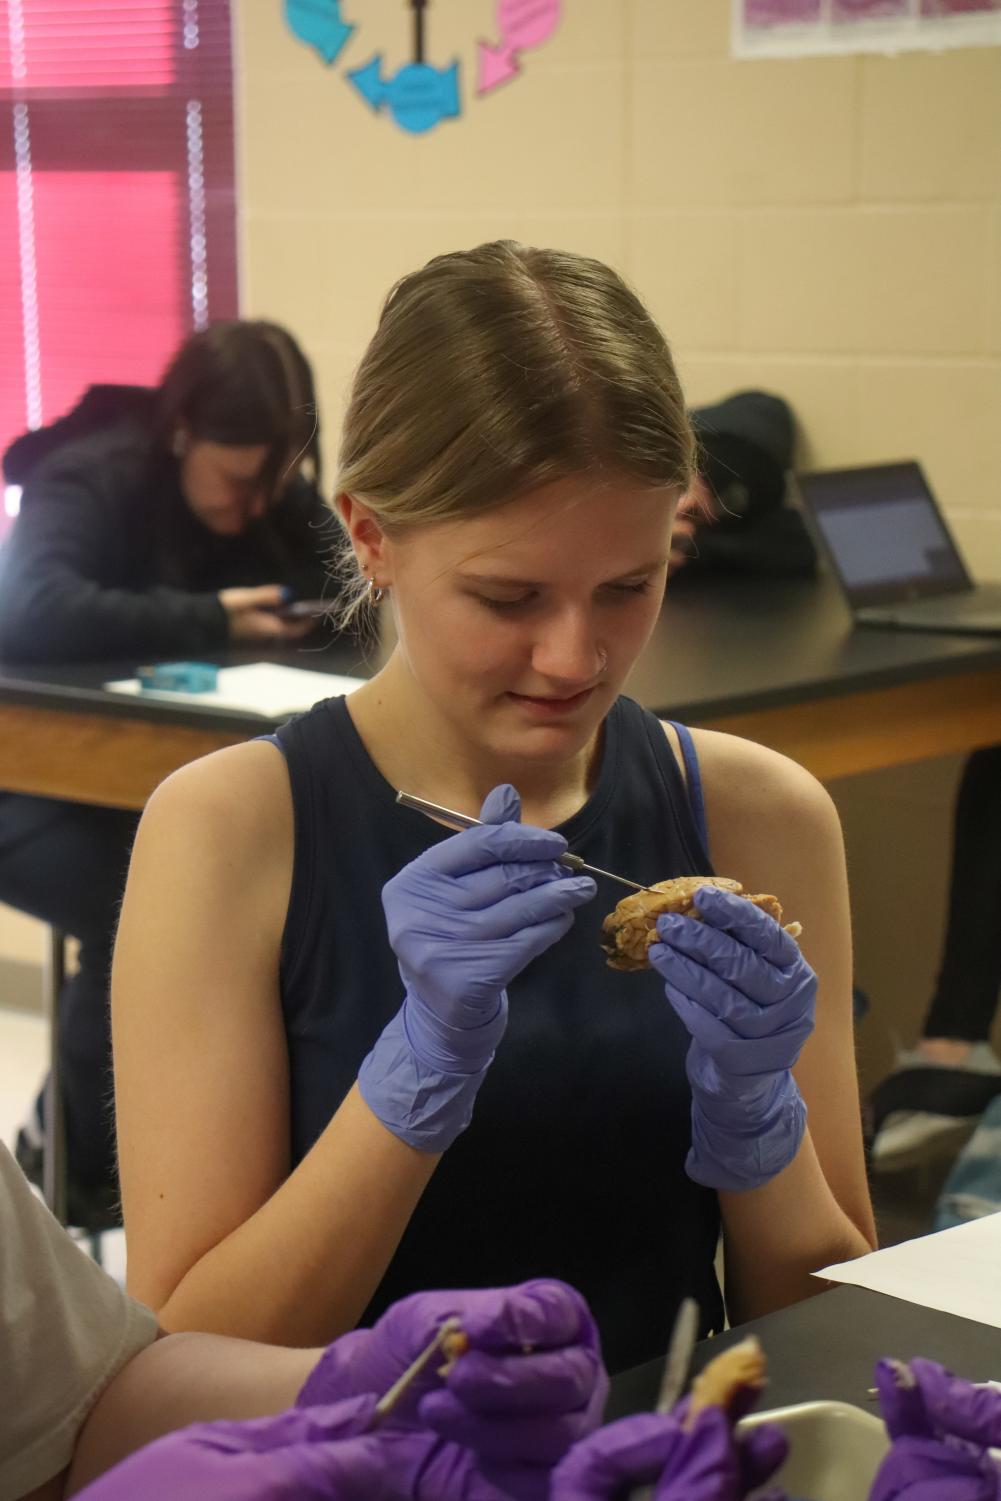 Dissecting+brains+in+science+class+%28Photos+by+Mikah+Herzberg%29